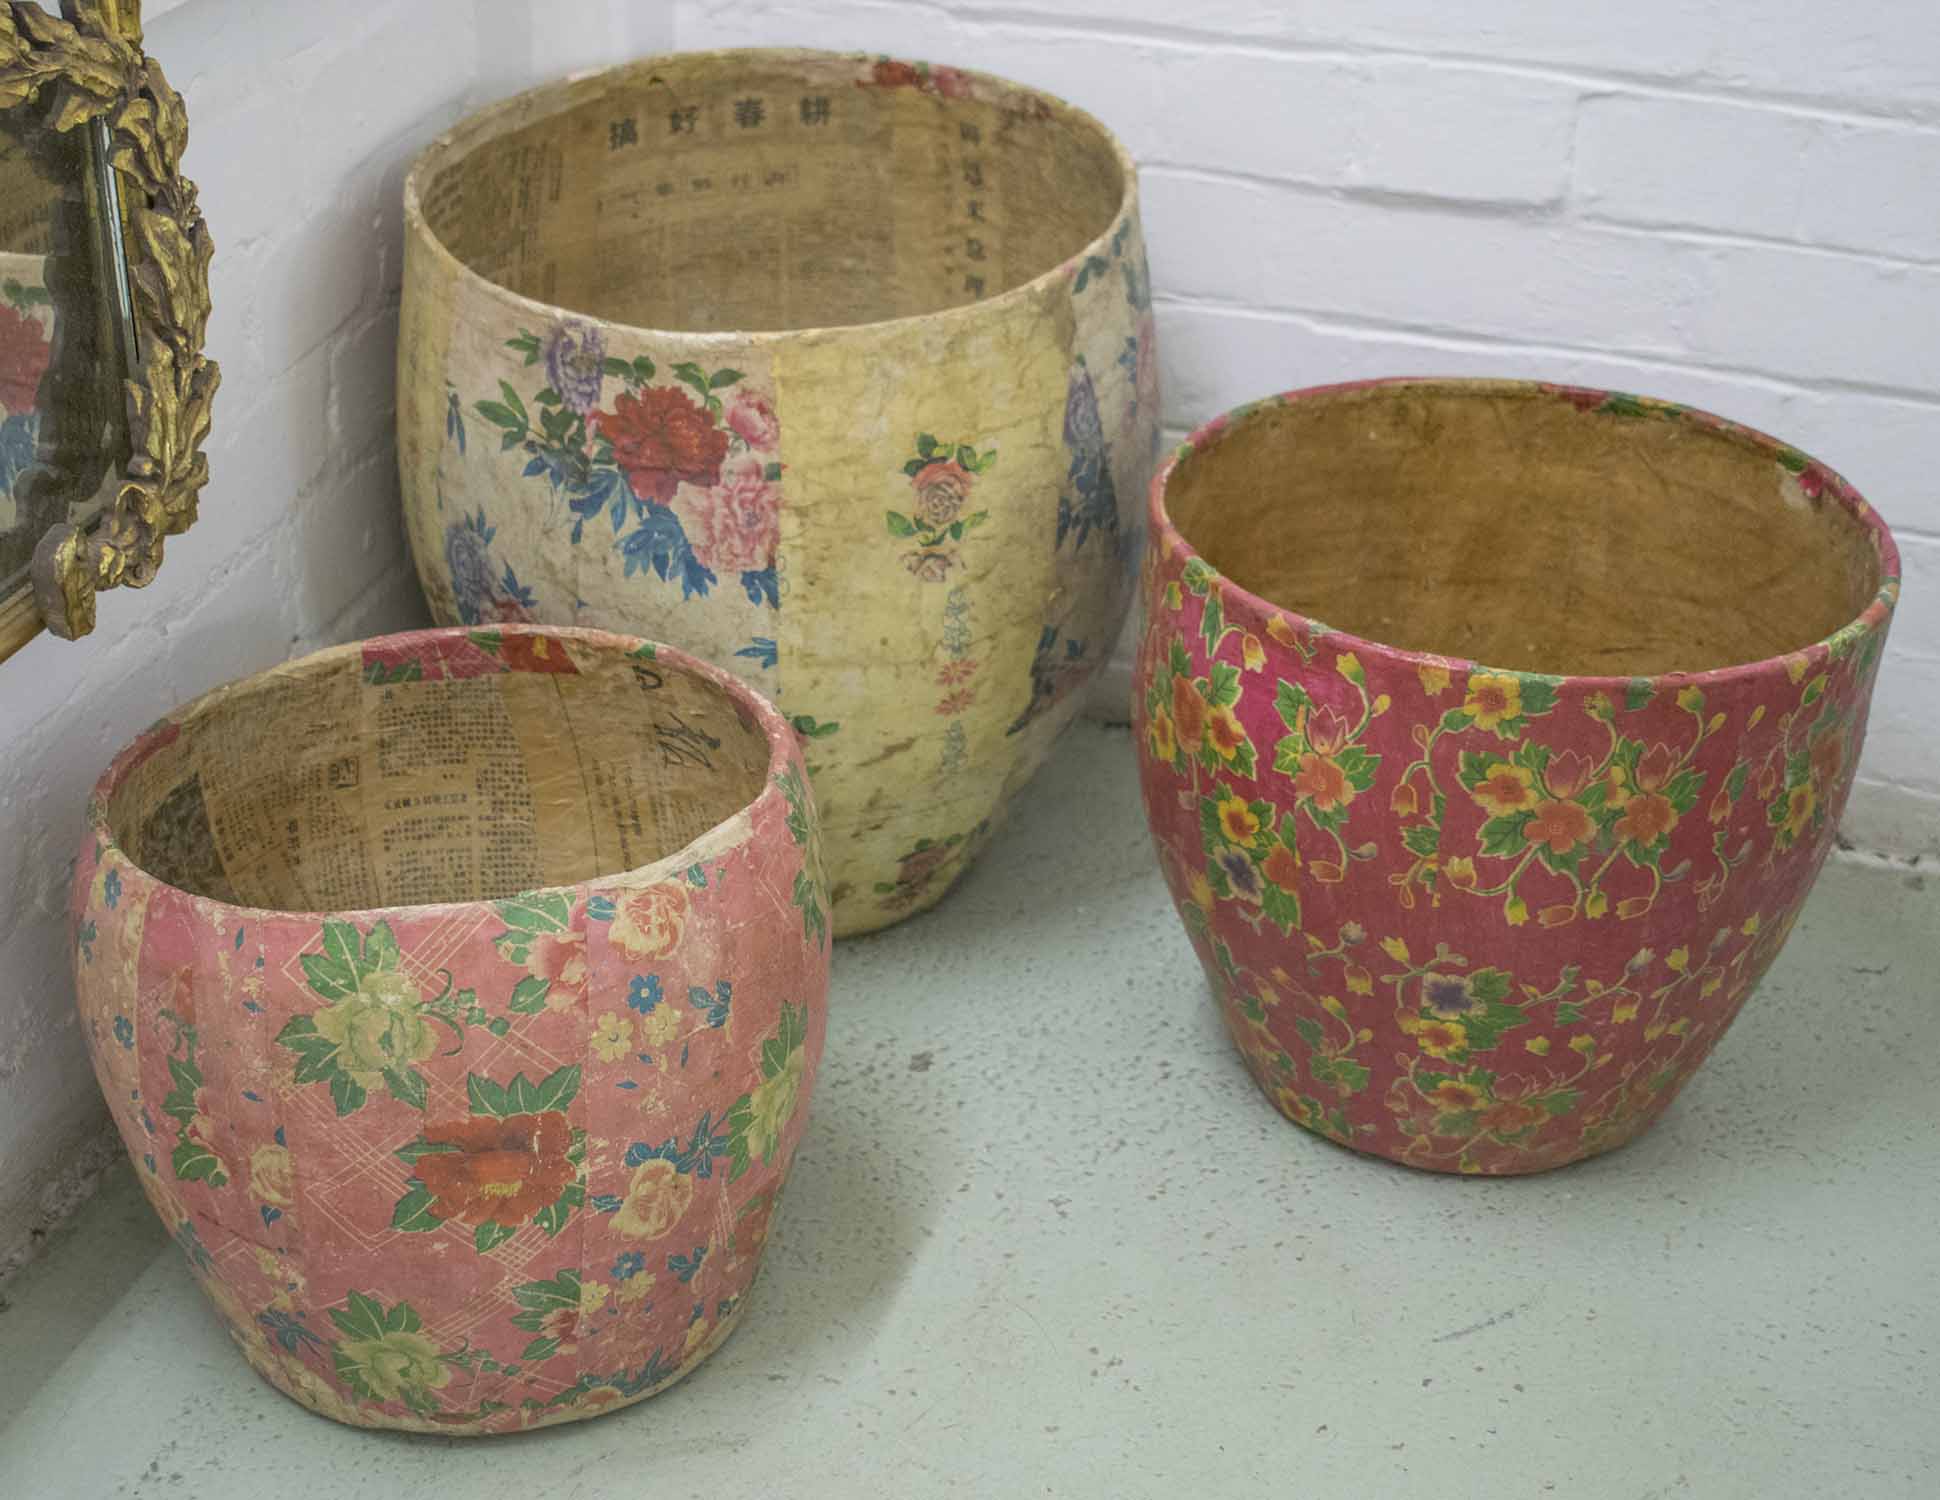 PAPIER MACHÉ JARDINIERES, three similar Chinese of graduated sizes and floral design,